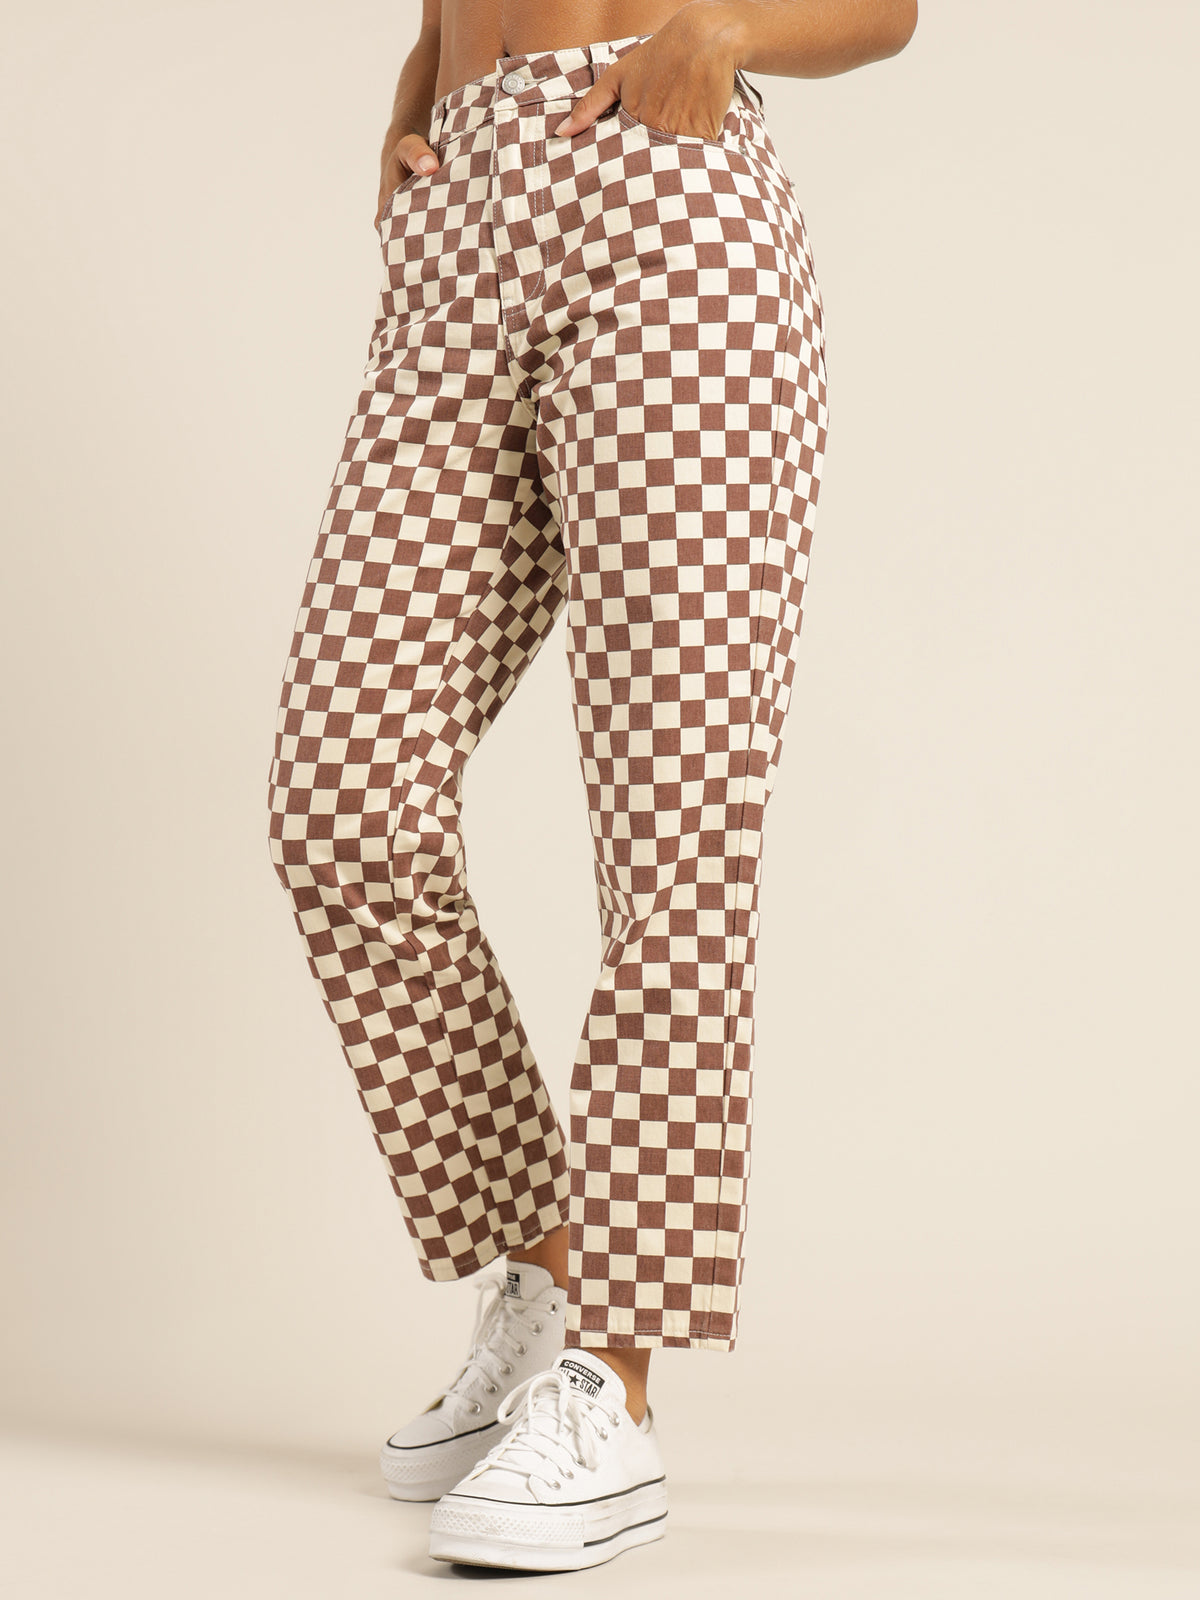 April Checkerboard Jeans in Berry